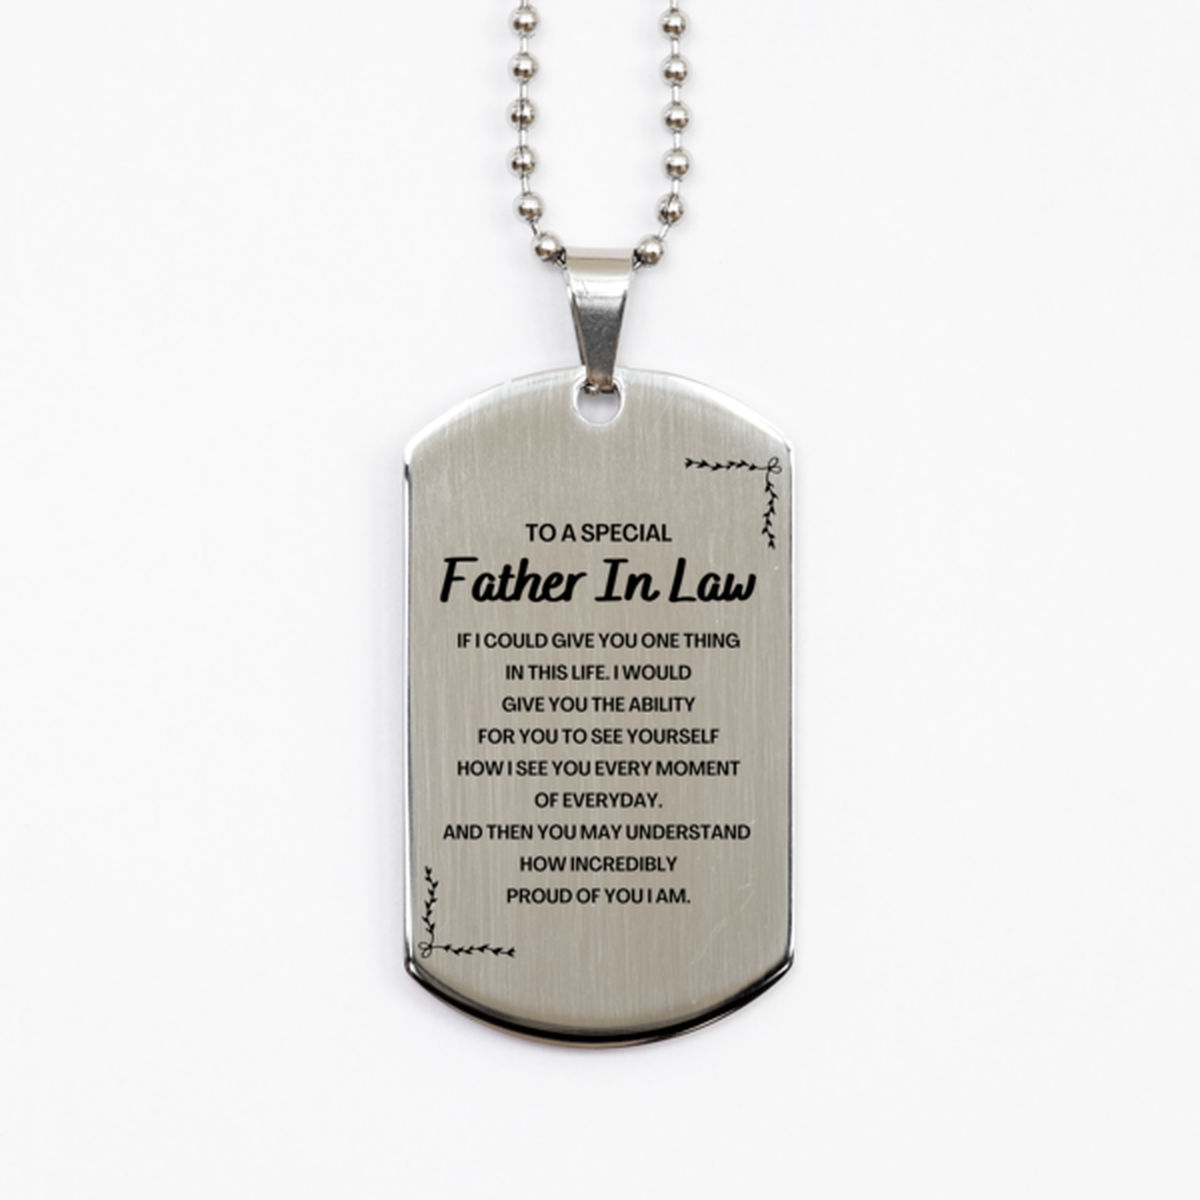 To My Father In Law Silver Dog Tag, Gifts For Father In Law Engraved, Inspirational Gifts for Christmas Birthday, Epic Gifts for Father In Law To A Special Father In Law how incredibly proud of you I am